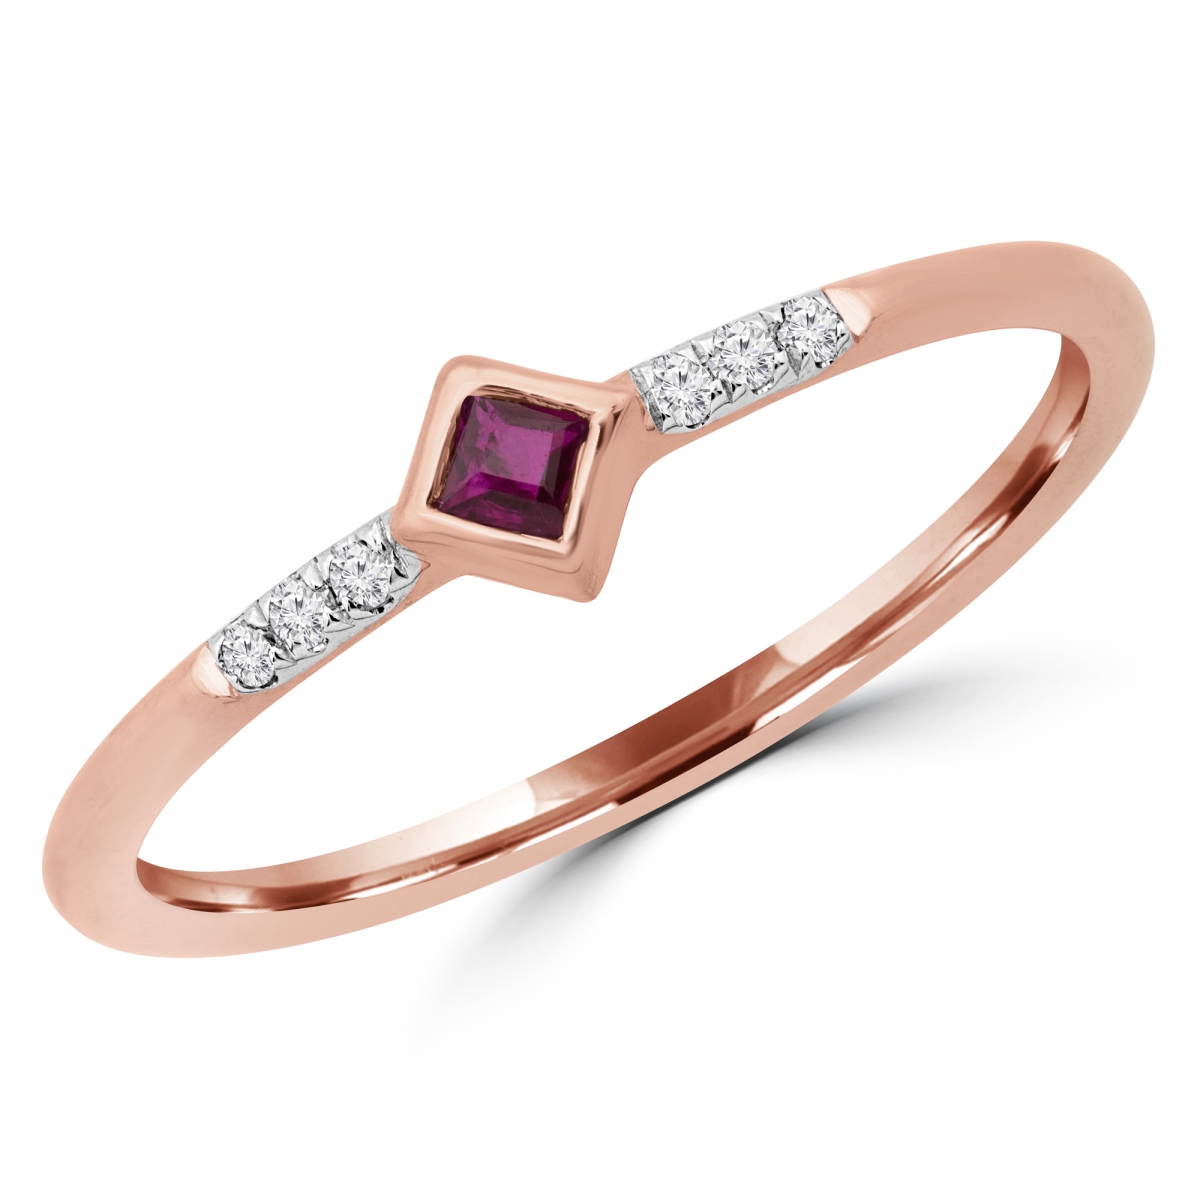 Picture of Majesty Diamonds MDR190078-8 0.1 CTW Round Red Ruby Bezel Set Cocktail Ring in 14K Rose Gold - Size 8